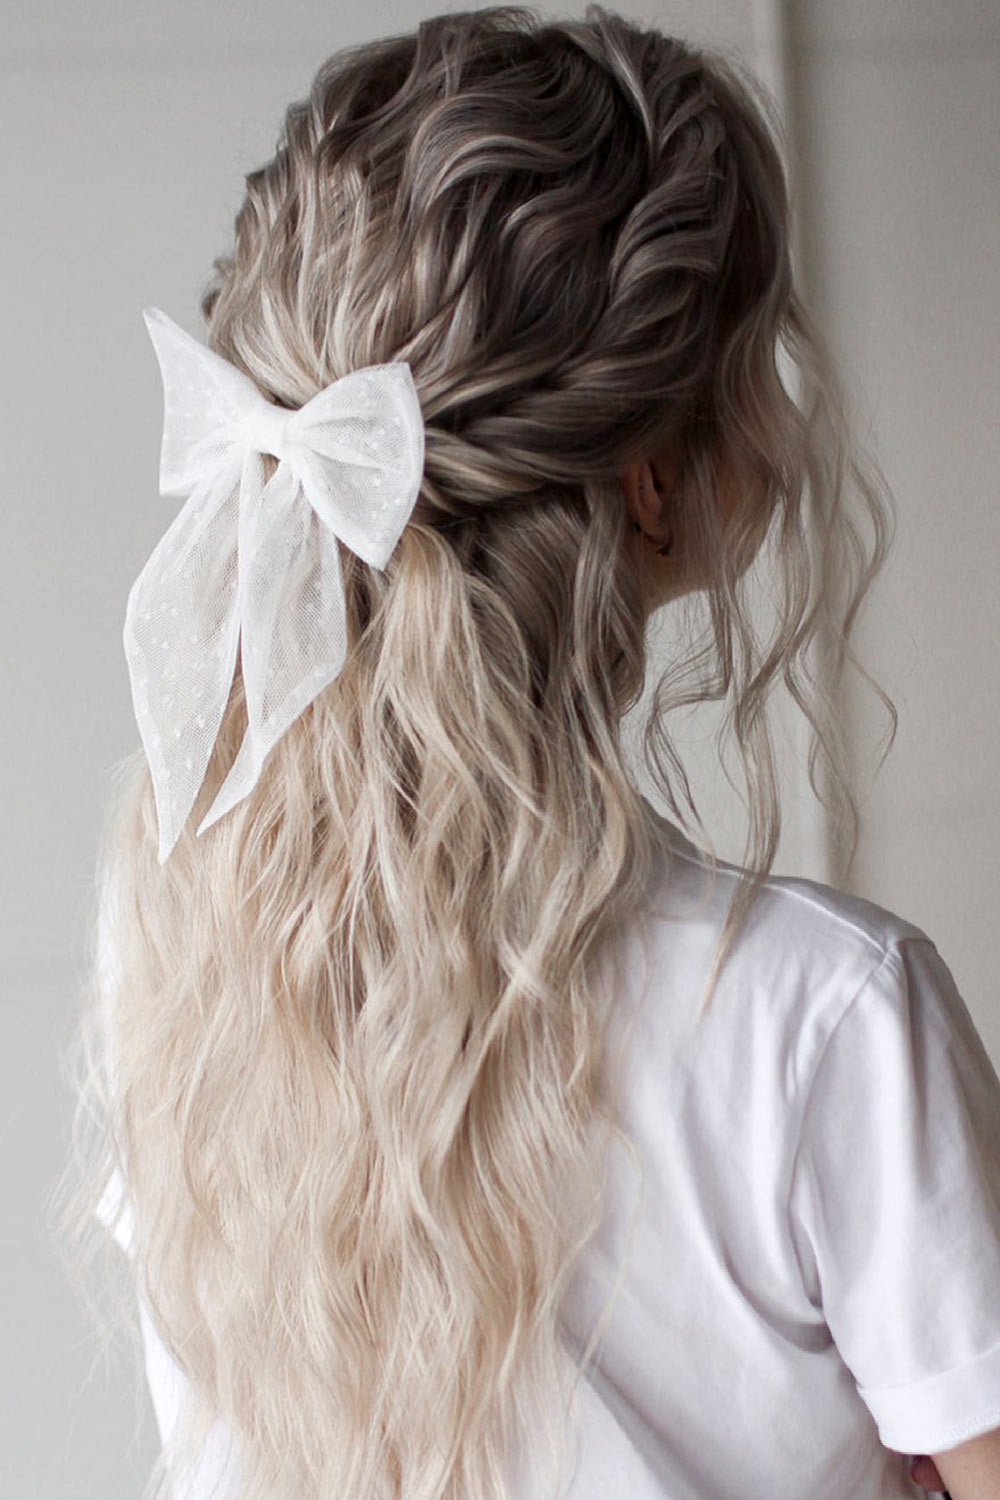 Cute Wedding Hairstyle With A Bow